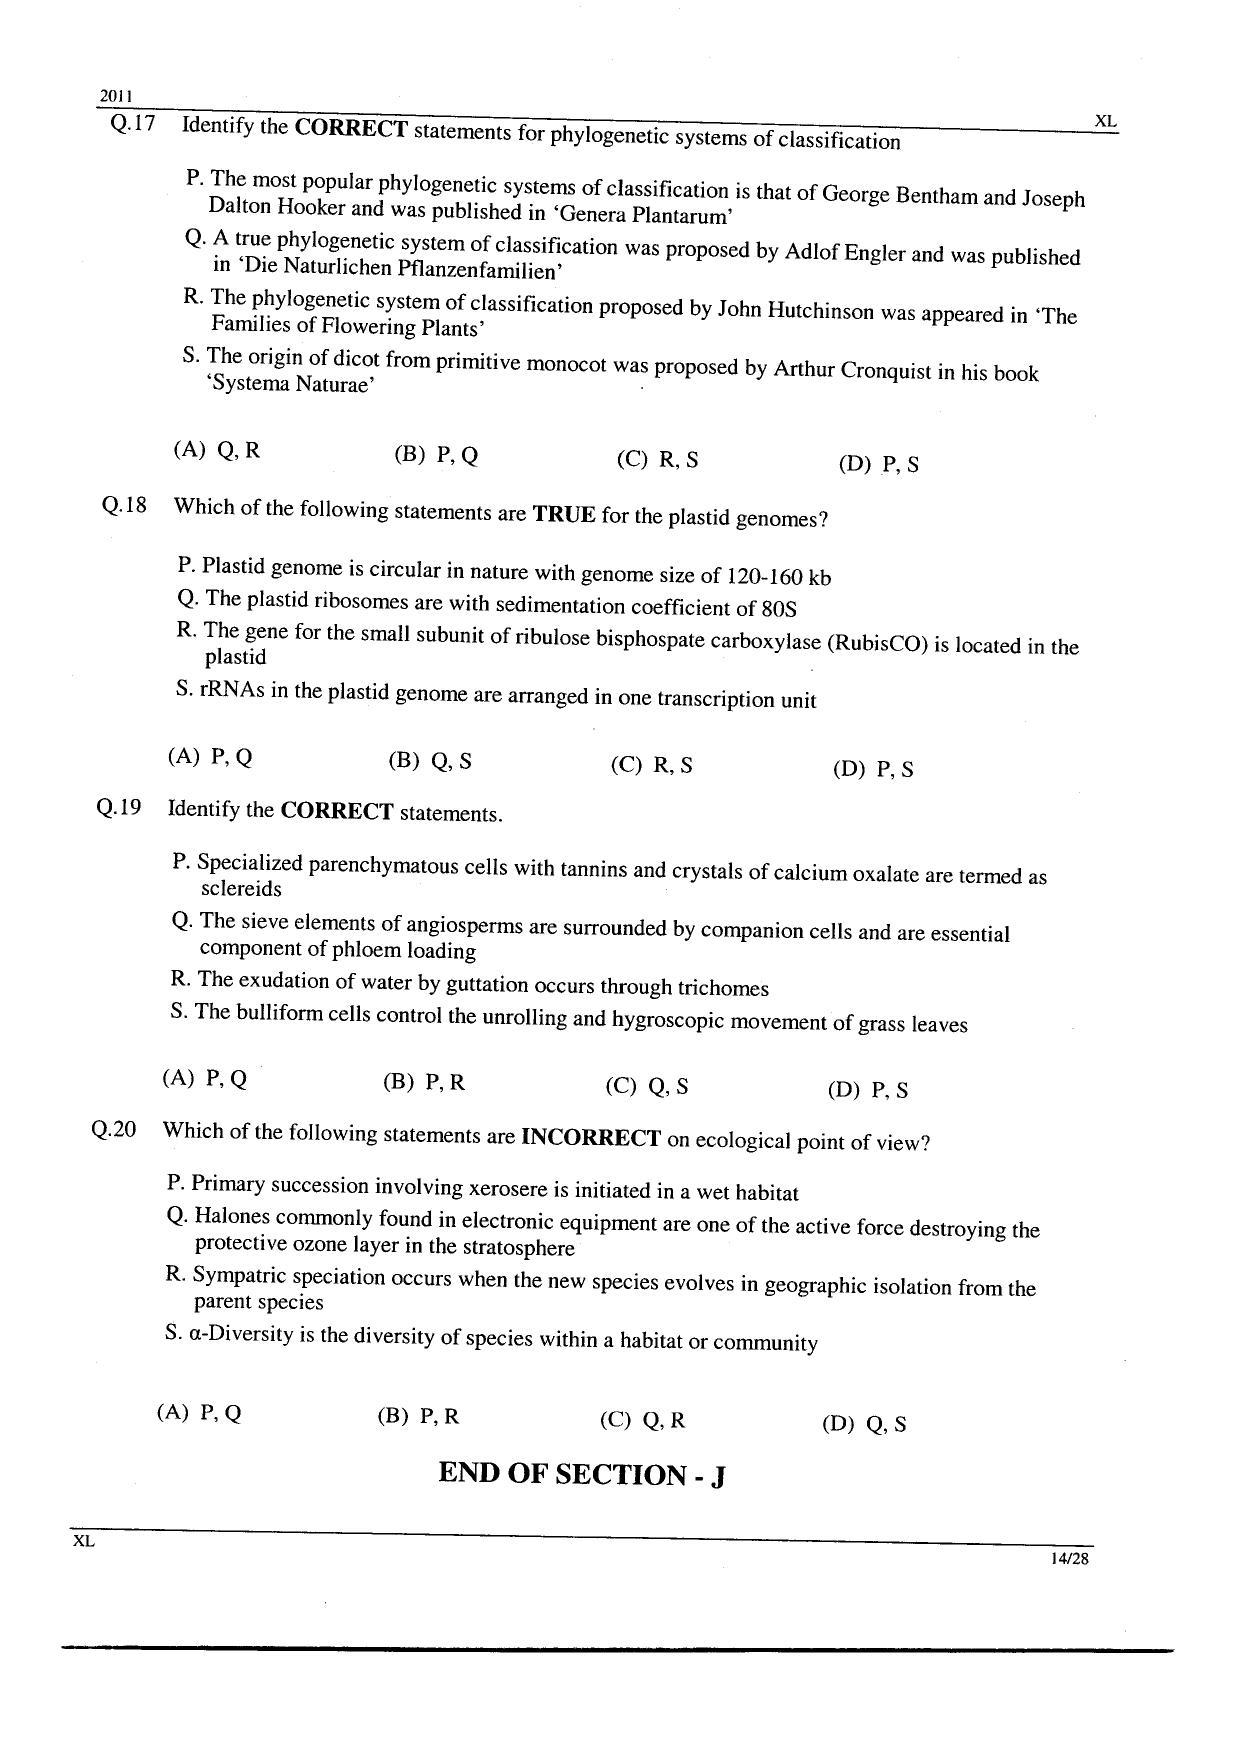 GATE 2011 Life Sciences (XL) Question Paper with Answer Key - Page 14